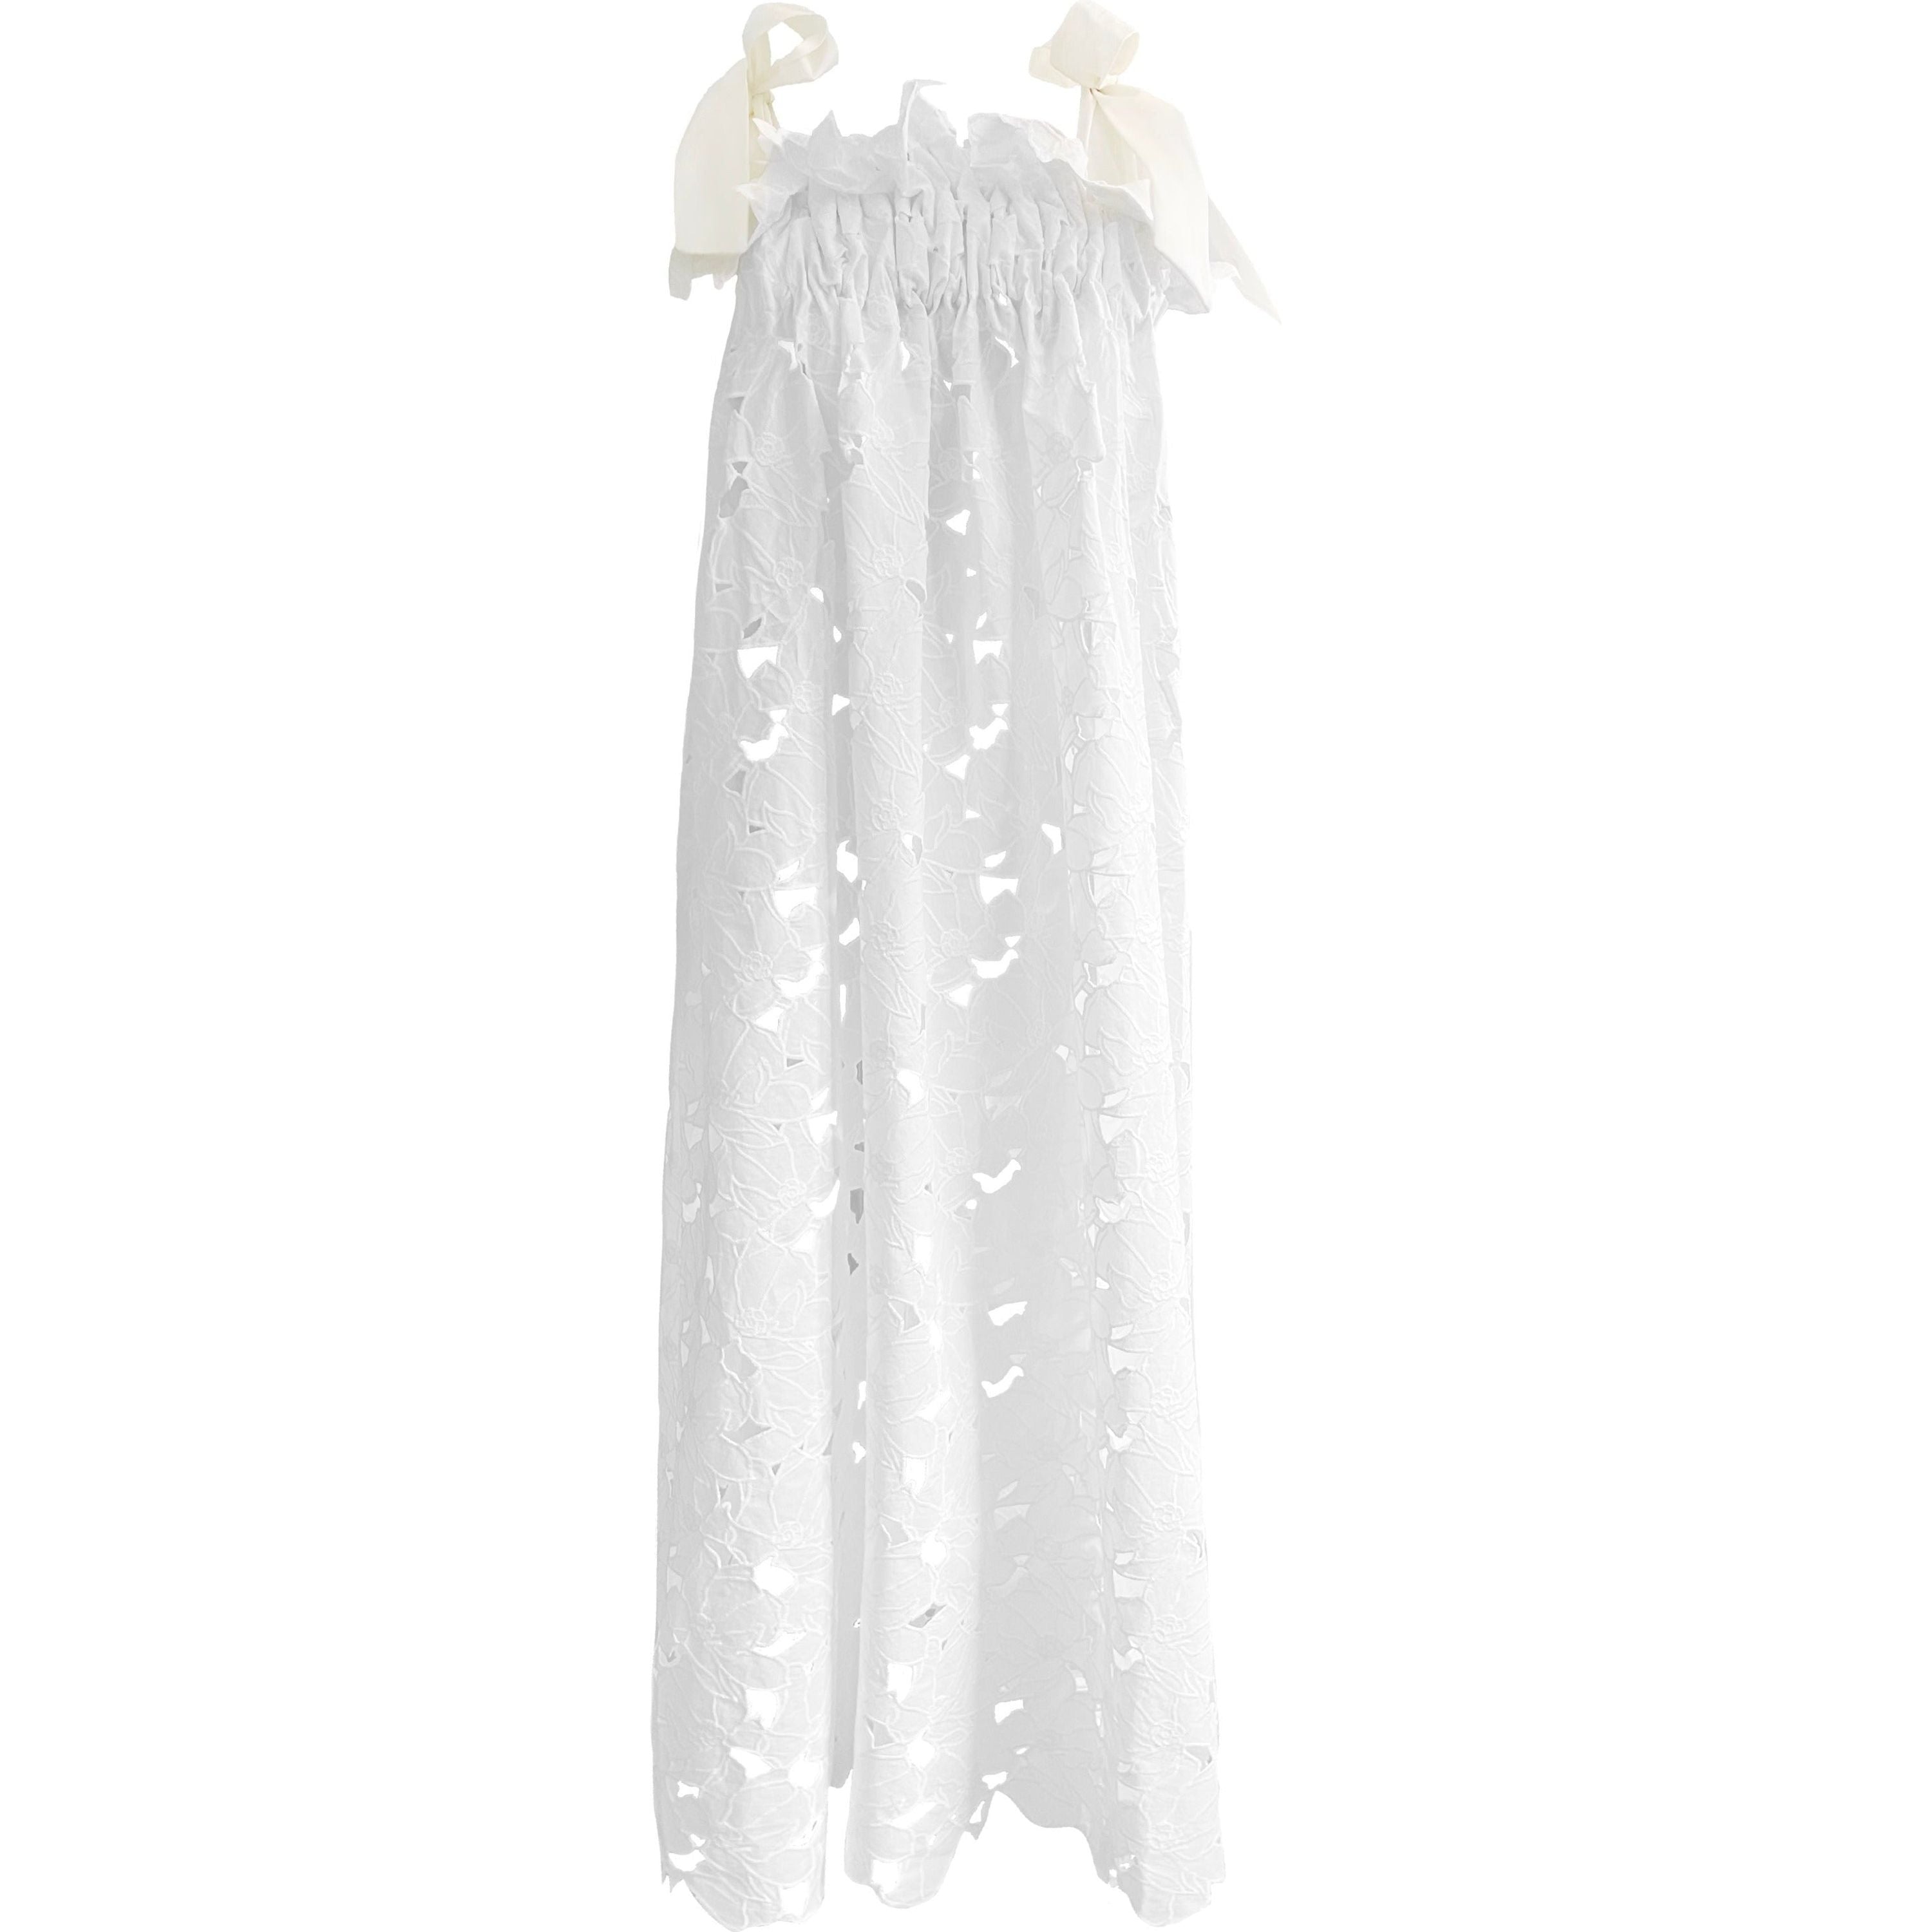 Women's Jaime Dress in White Magnolia Blossom Lace by Casey Marks